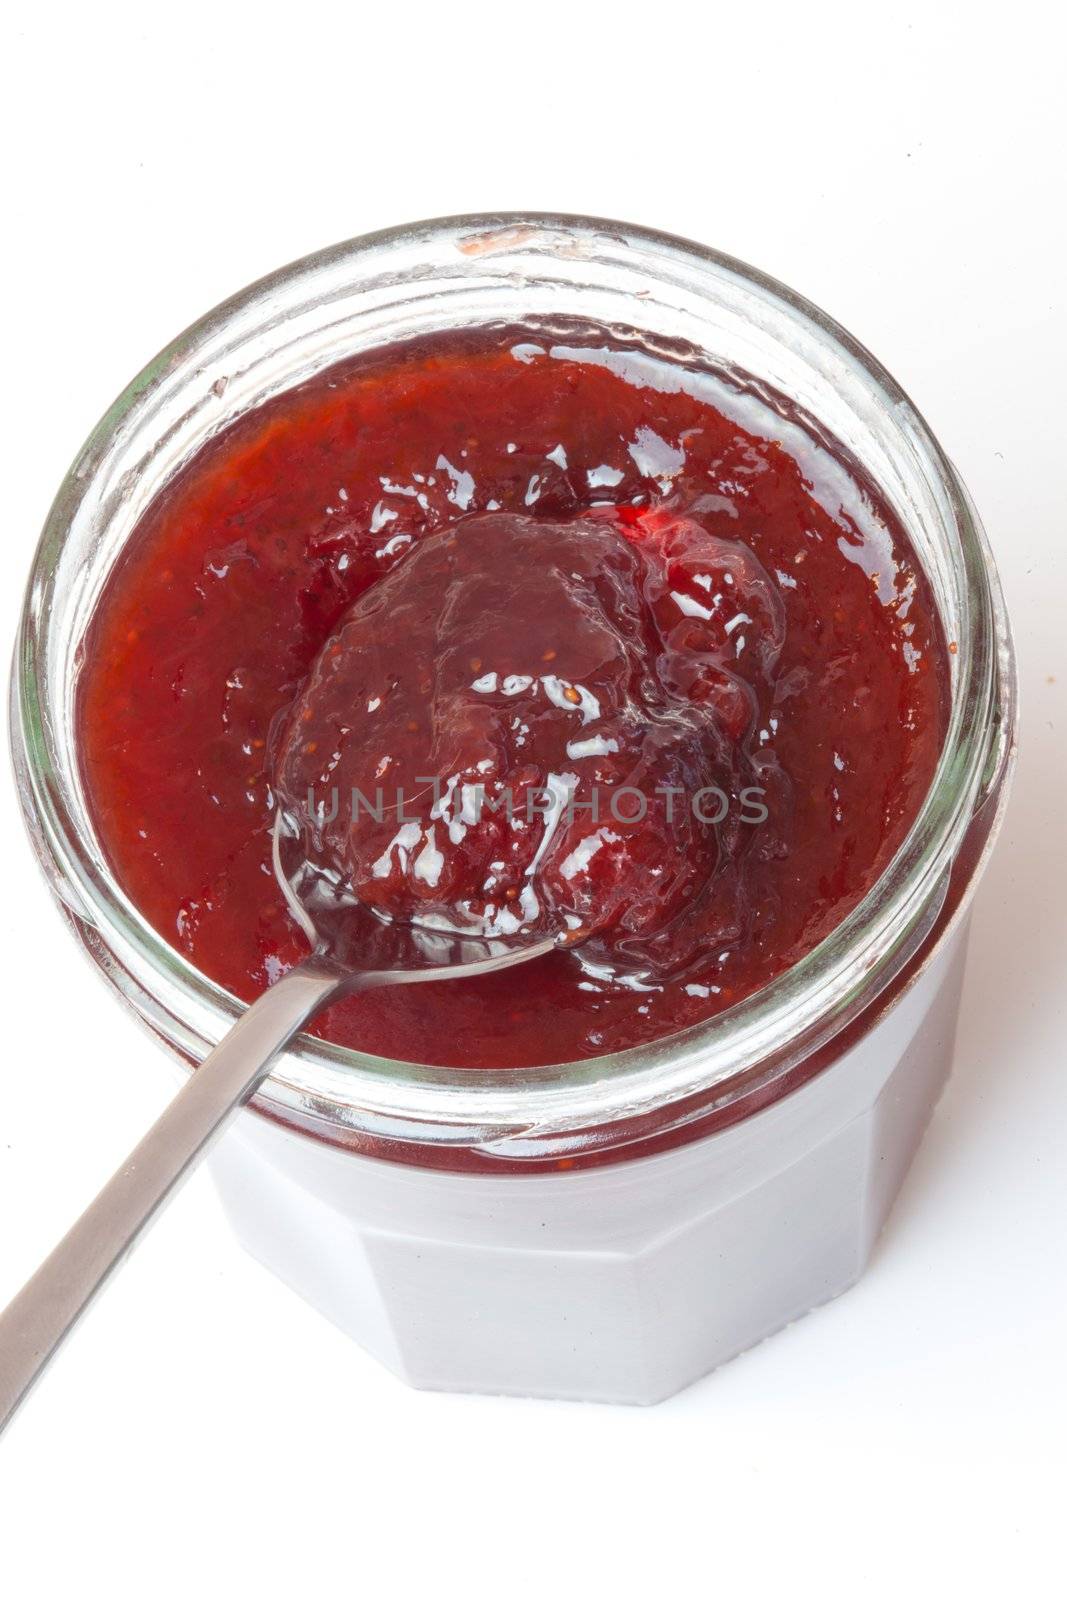 Jar of jam open against a white background